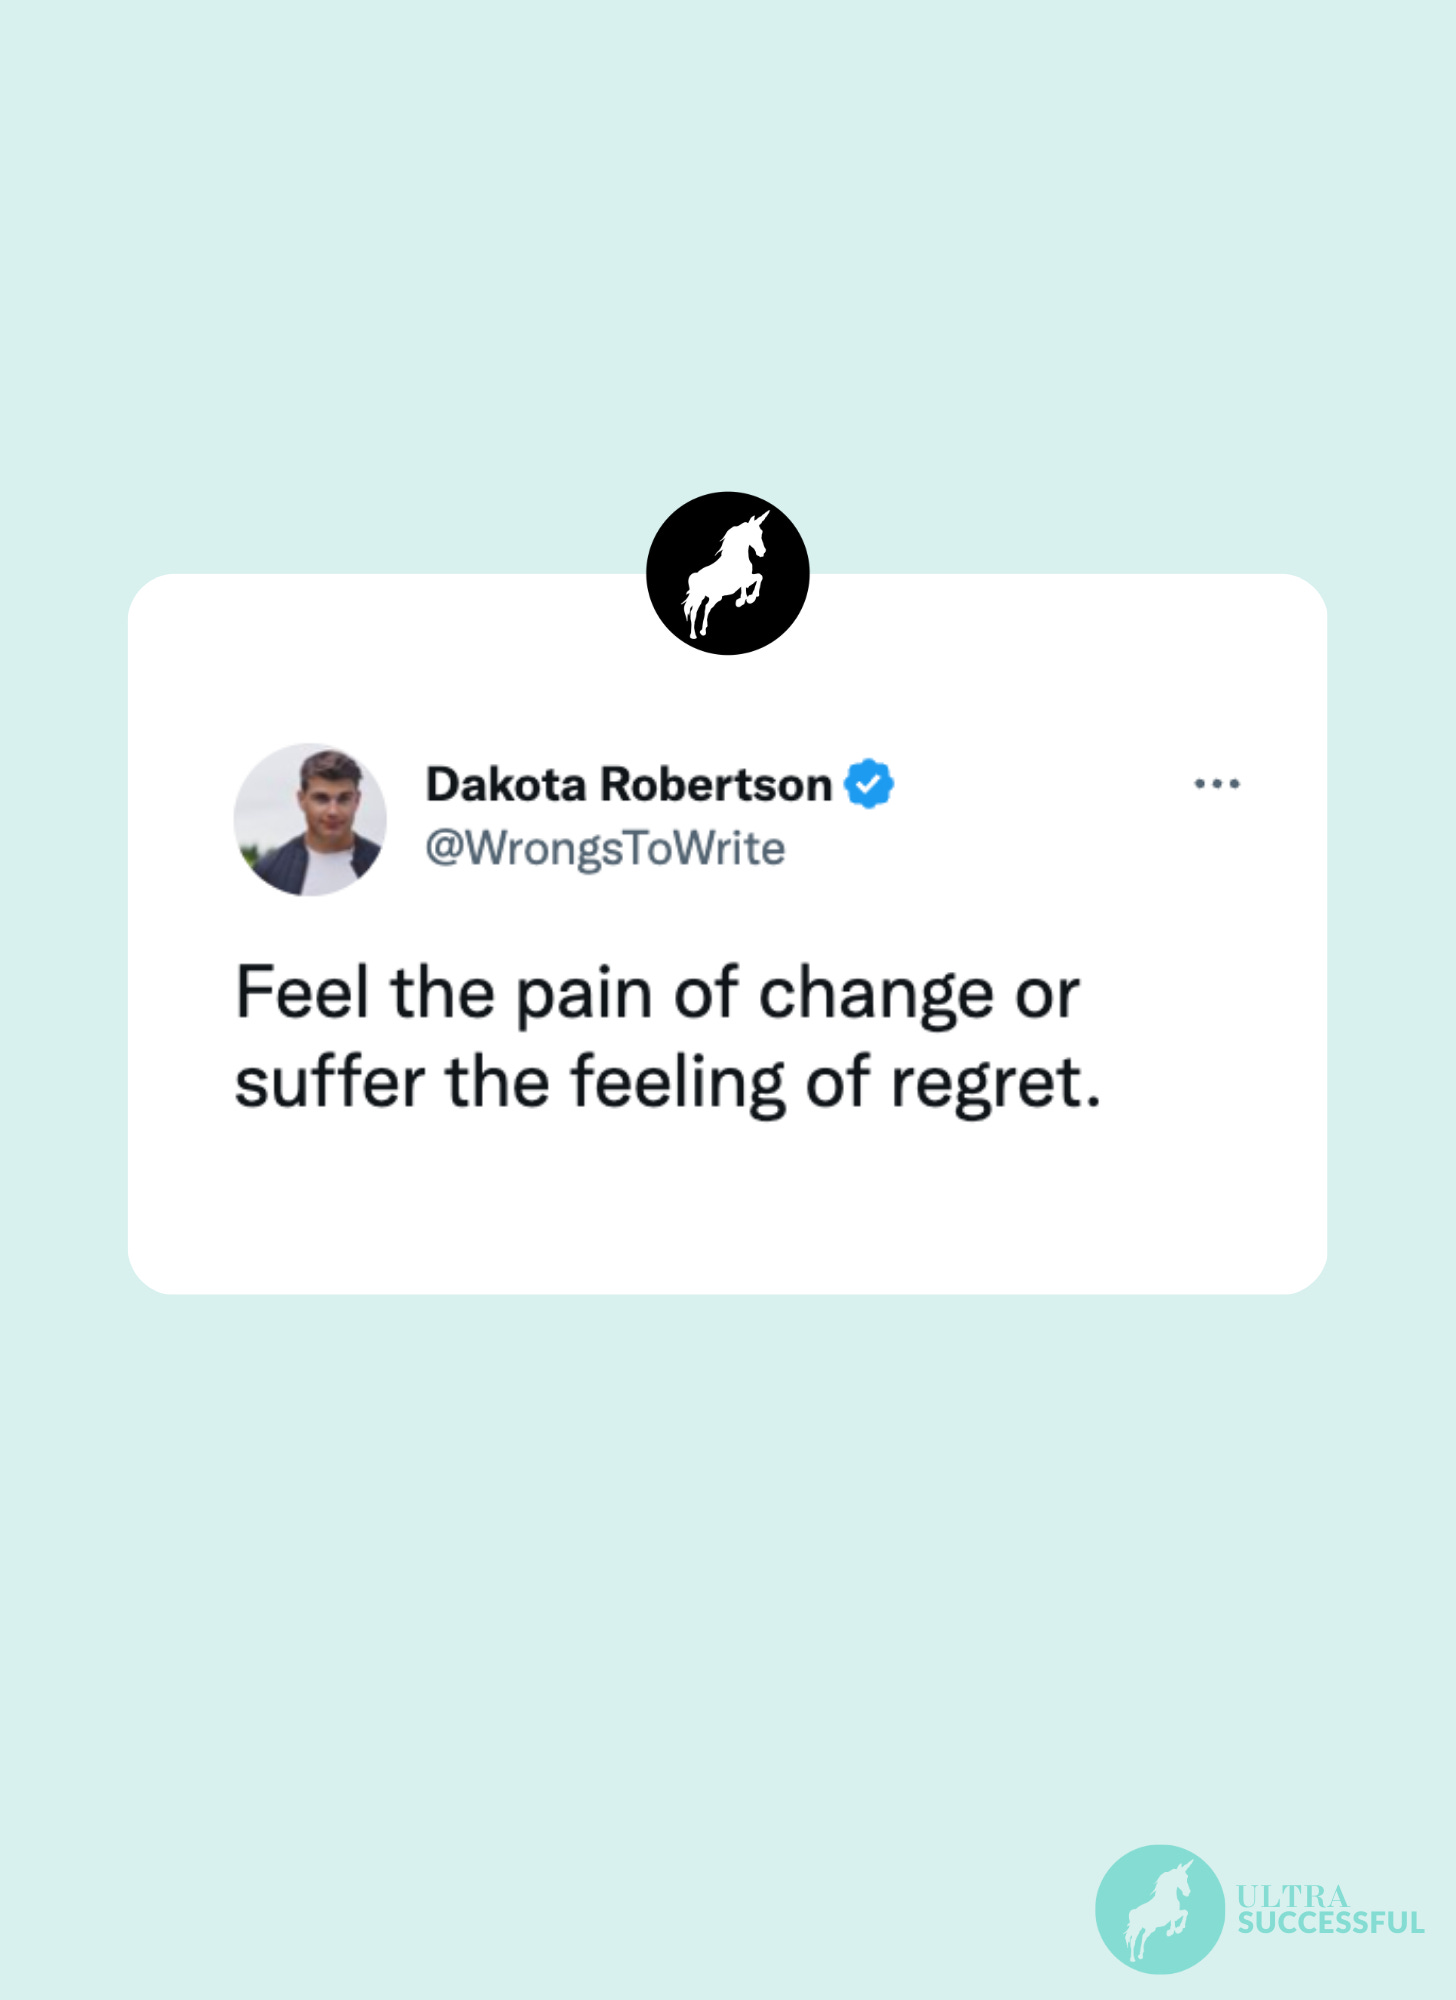 @WrongsToWrite: Feel the pain of change or suffer the feeling of regret.